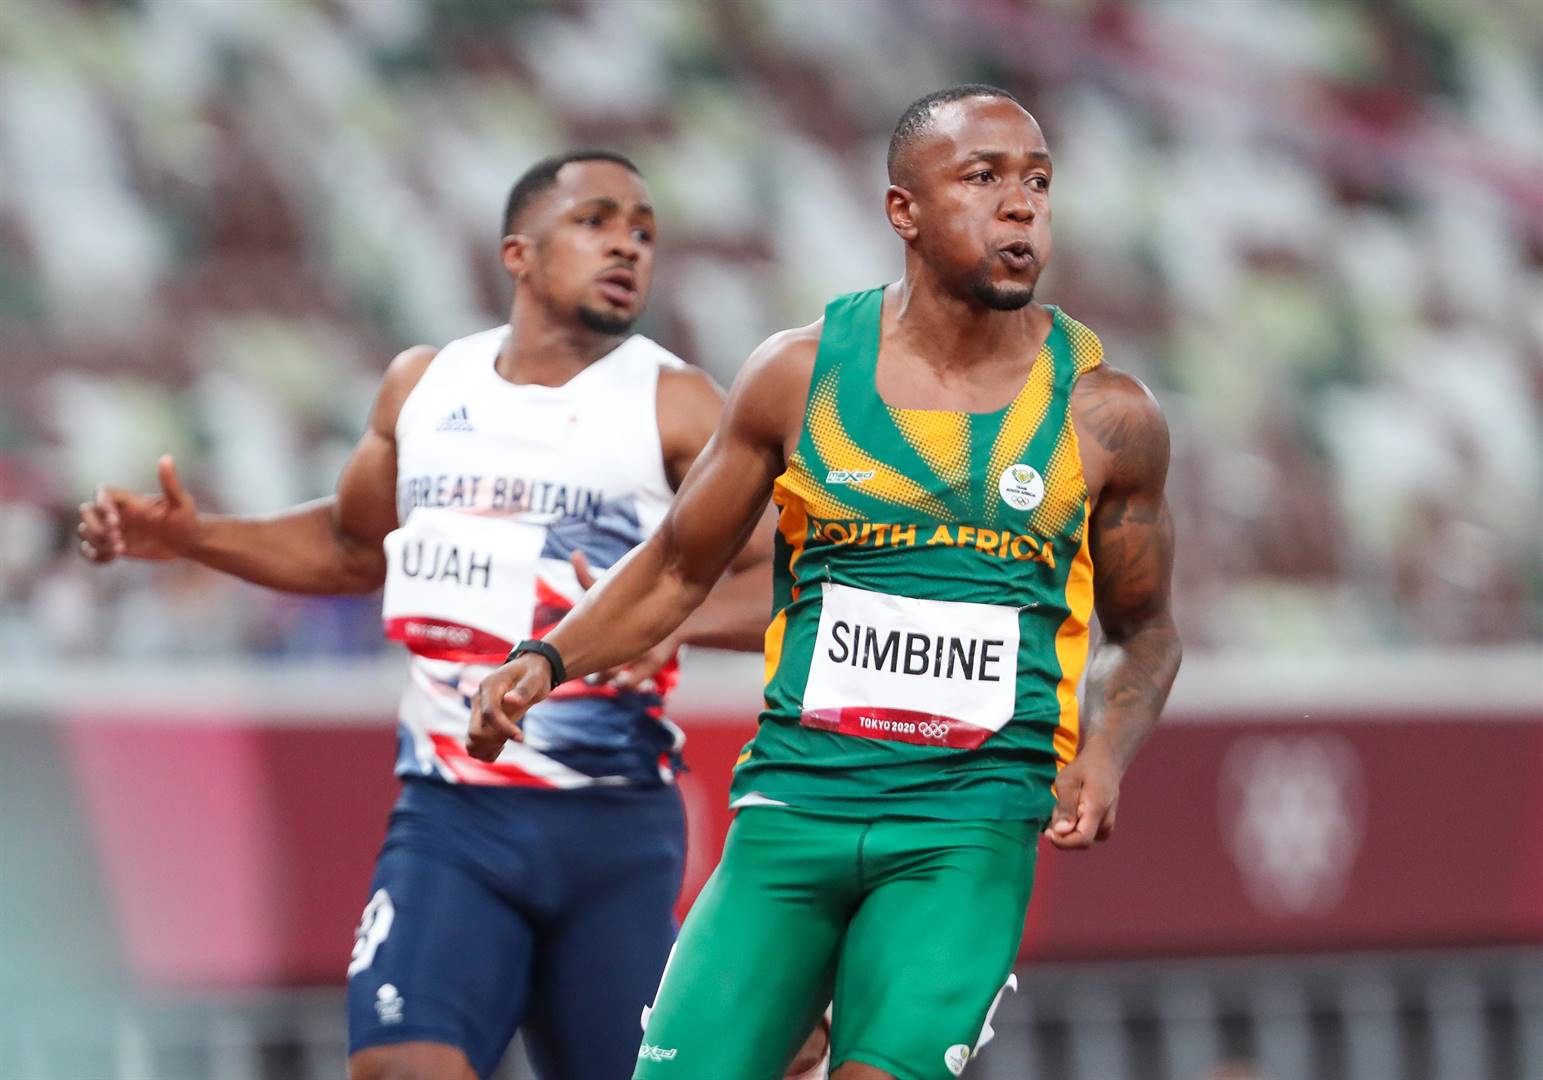 Samaai and Simbine chase trophies in Diamond League finals Witness